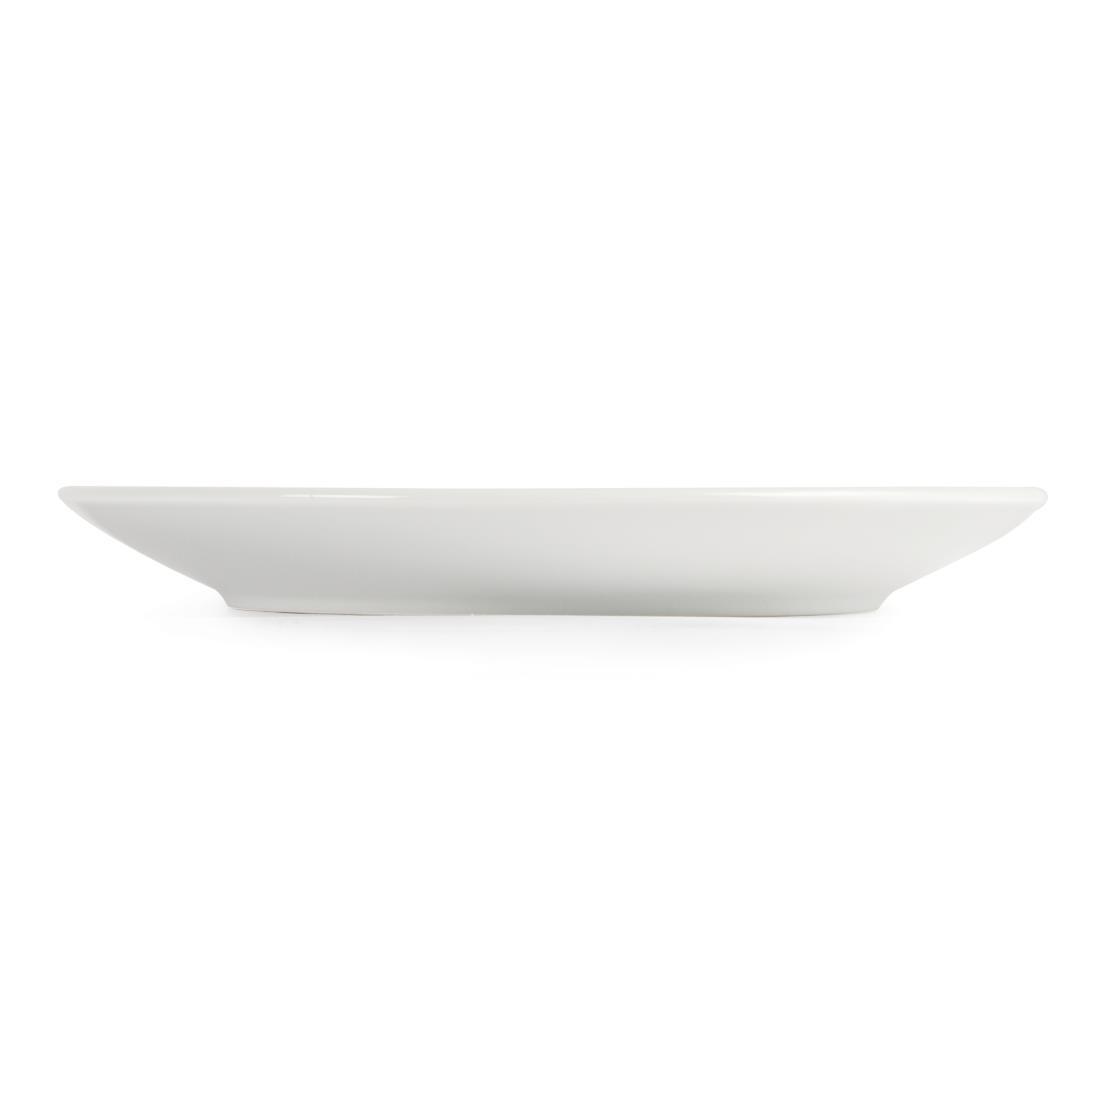 Olympia Whiteware Coupe Plates 230mm (Pack of 12) - U078  - 3